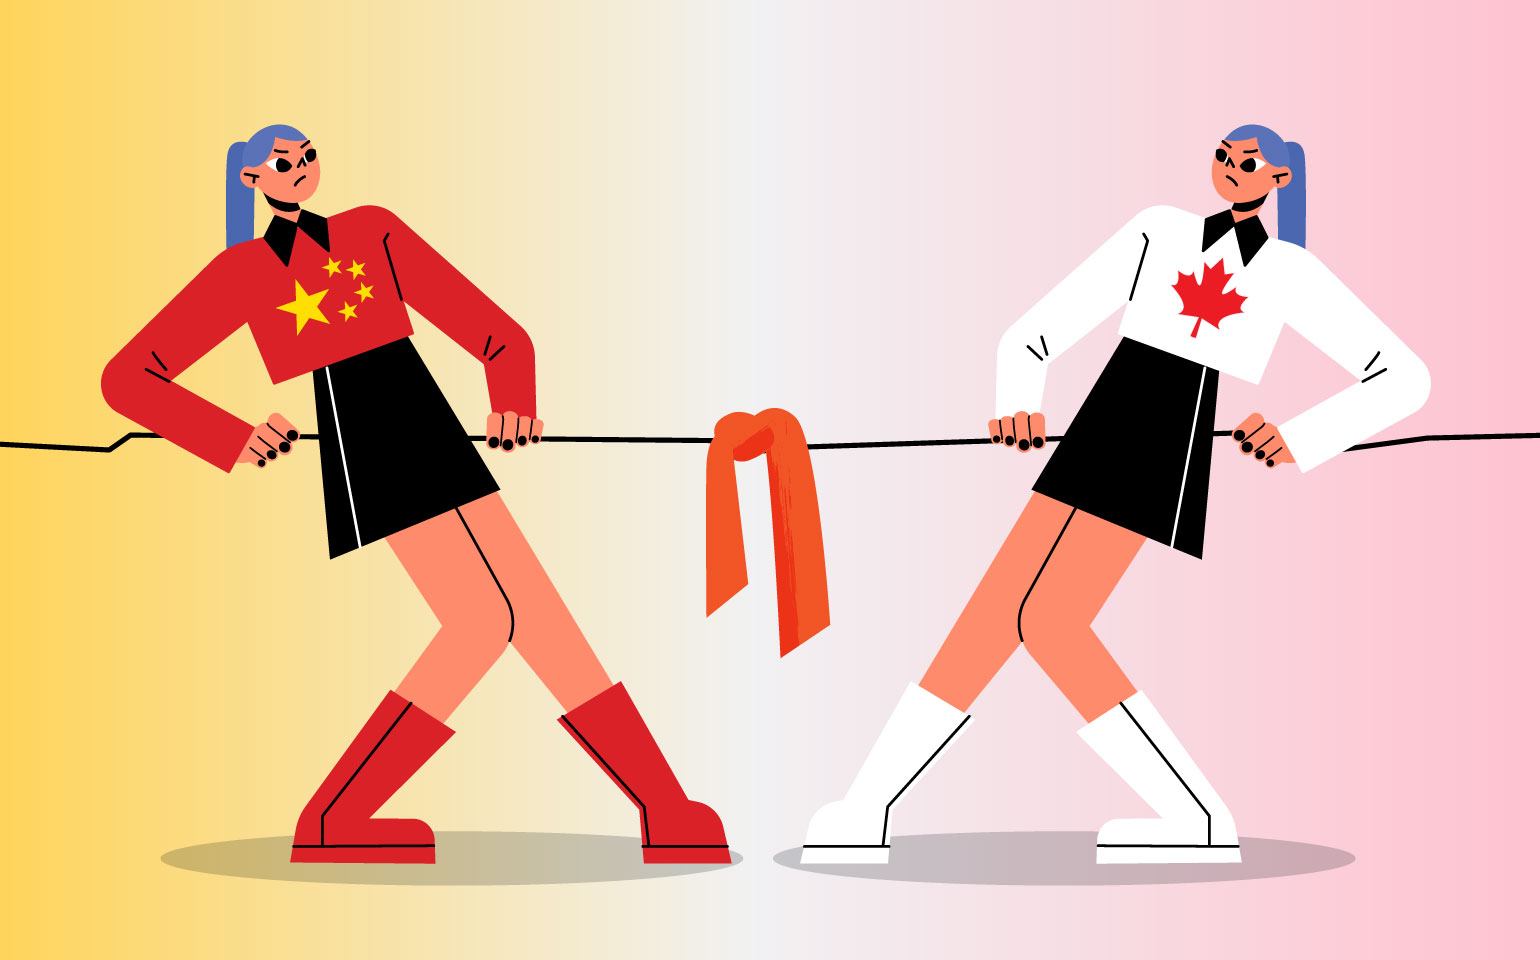 A woman representing China and another representing Canada play a game of tug-of-war.